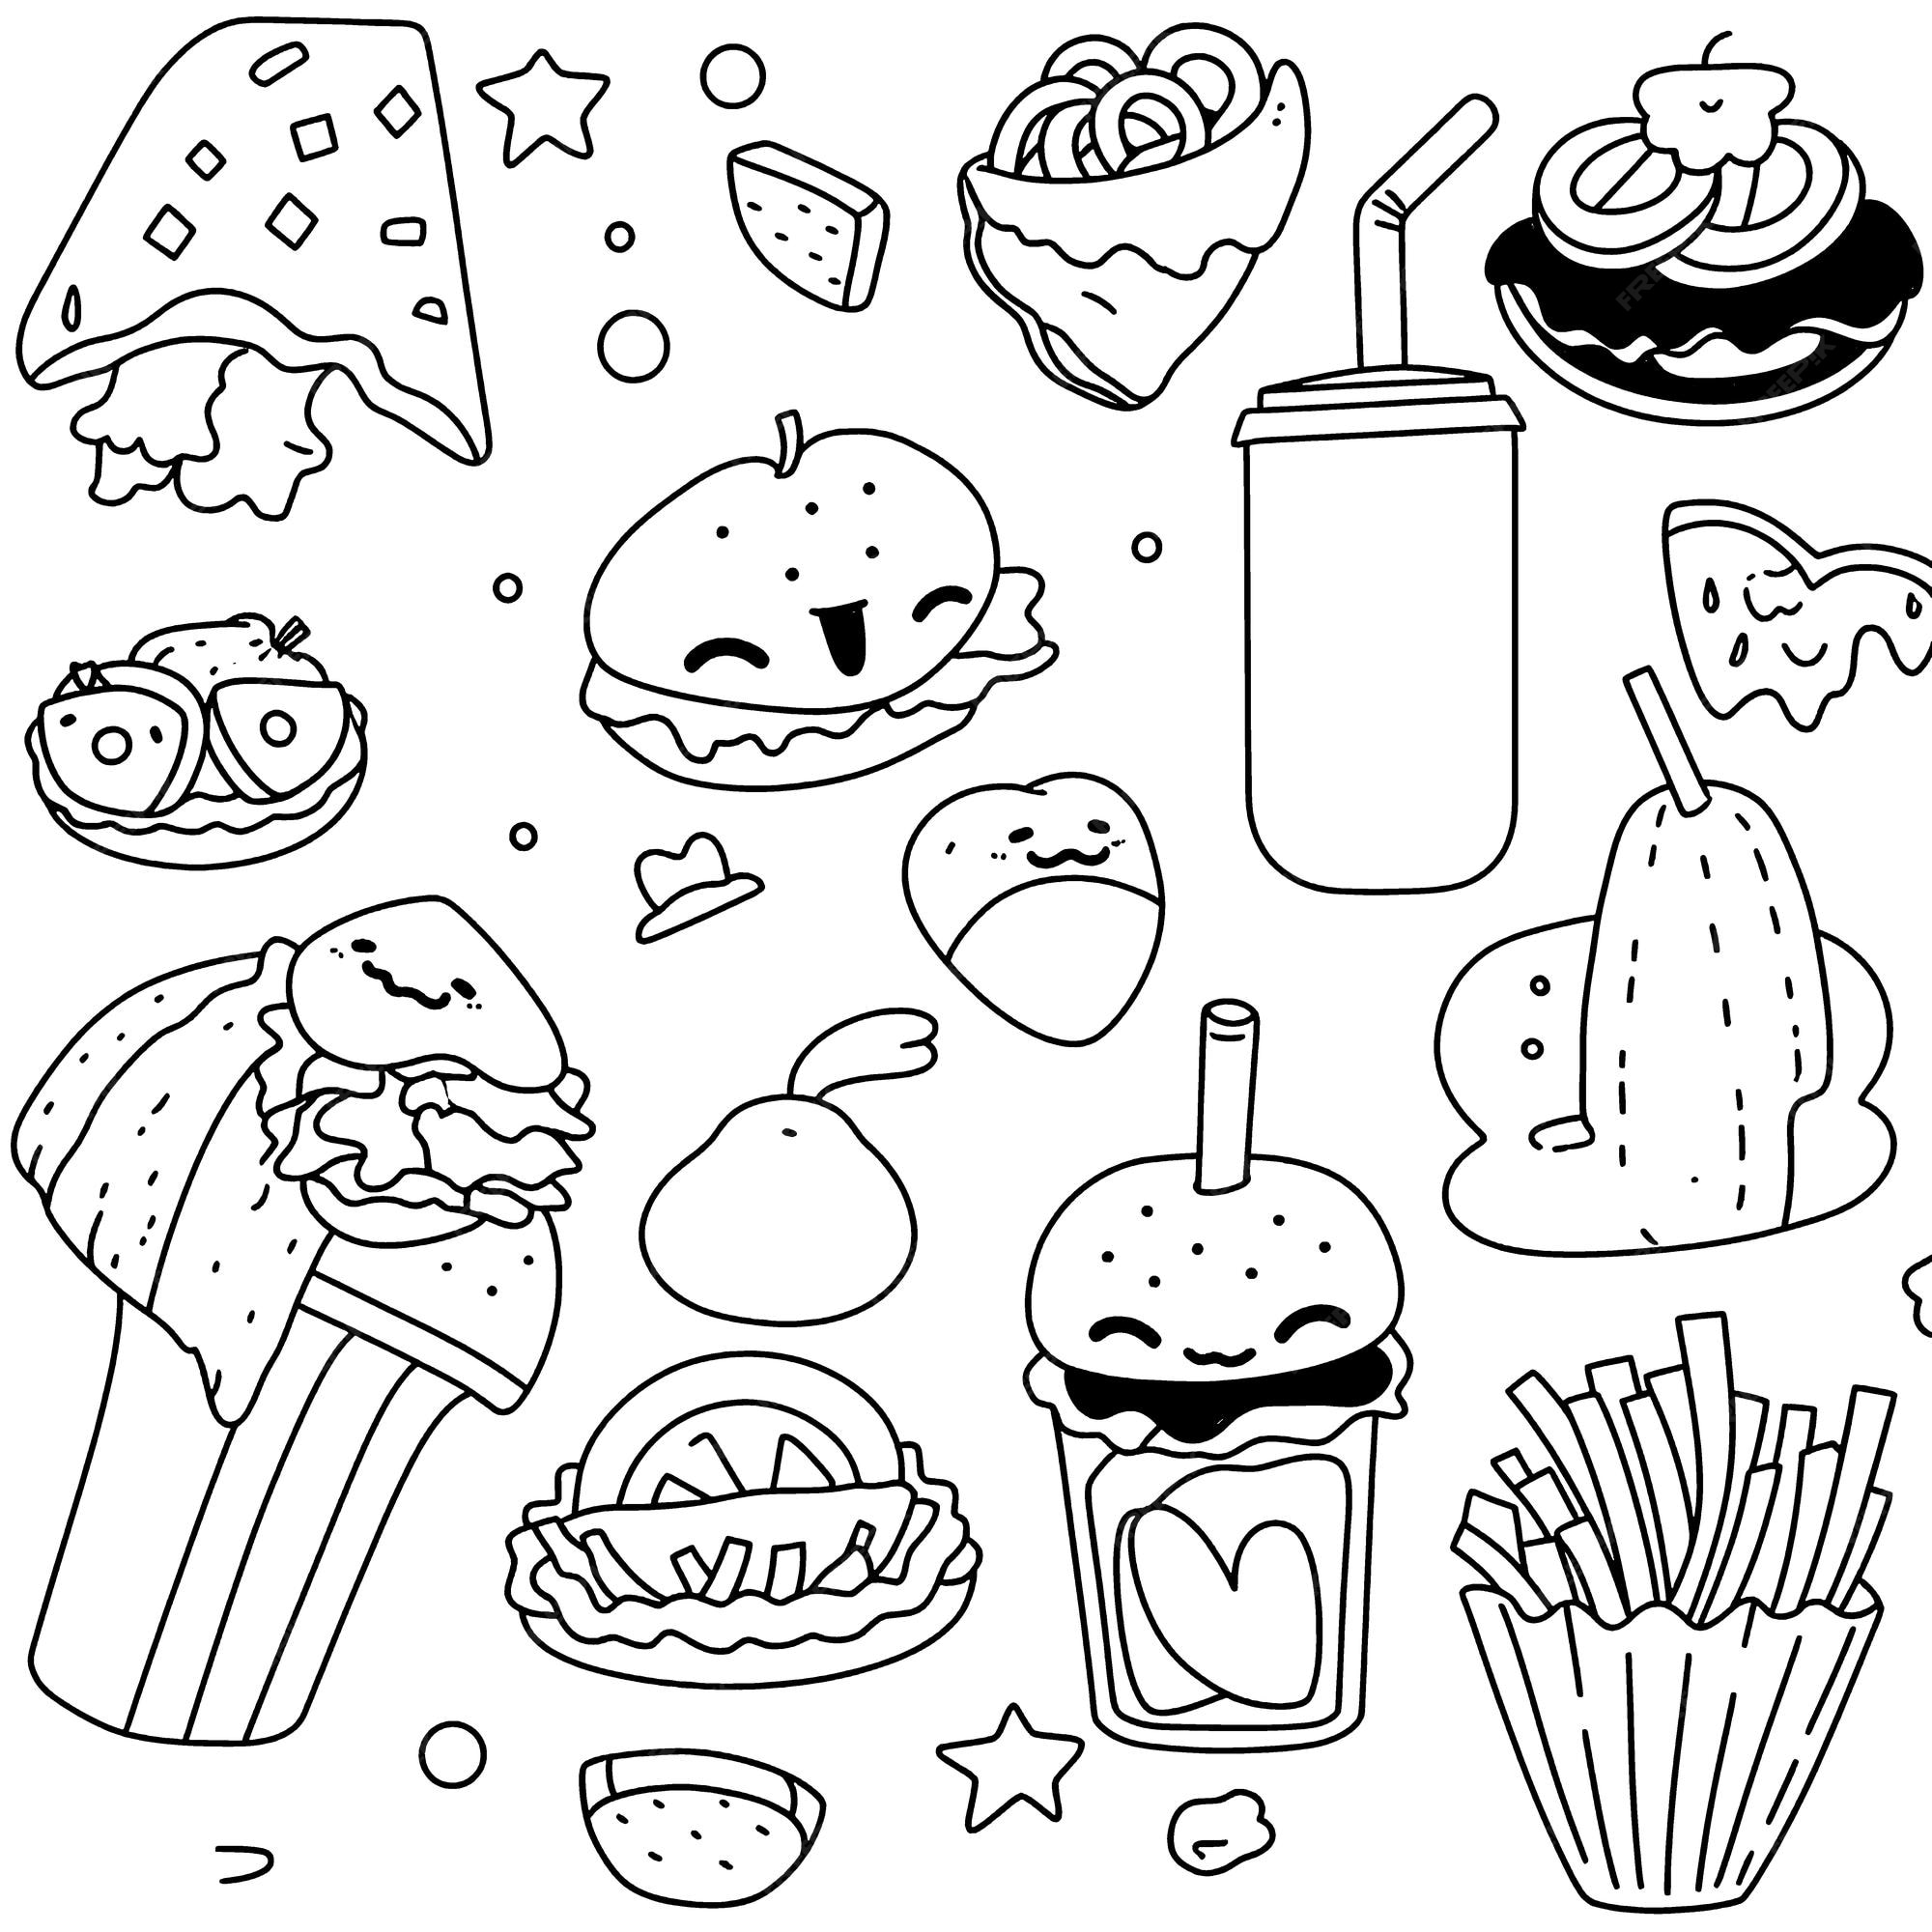 Premium vector cute fast food black and white coloring page for kids and adults line art simple cartoon style happy cute and funny